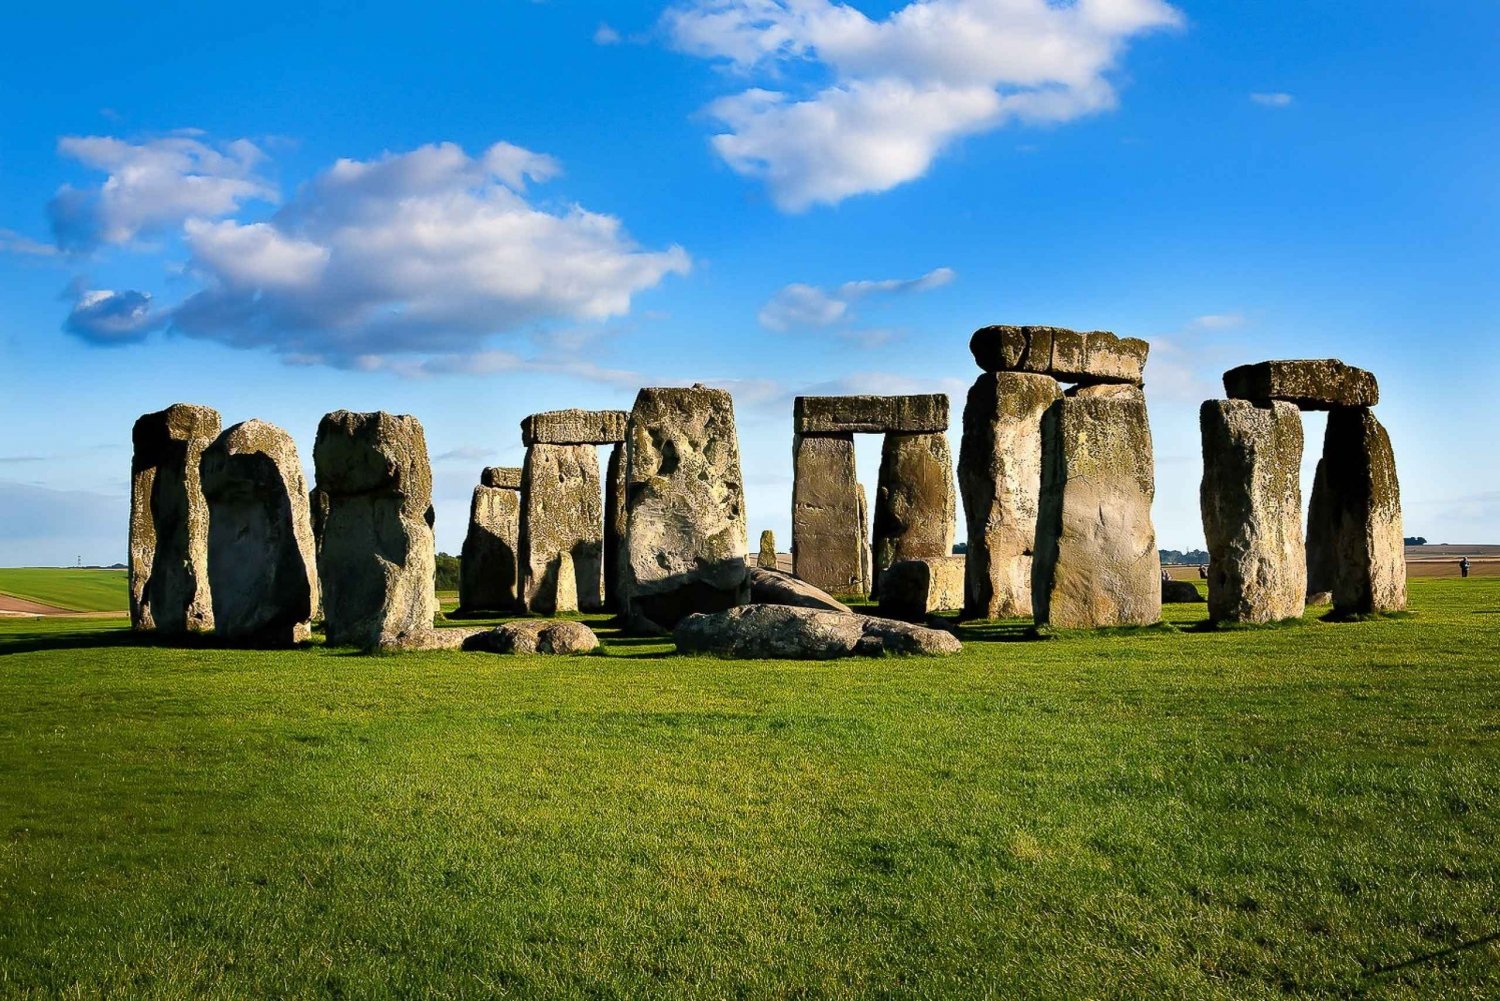 From London: Stonehenge and Bath Day Trip with Ticket